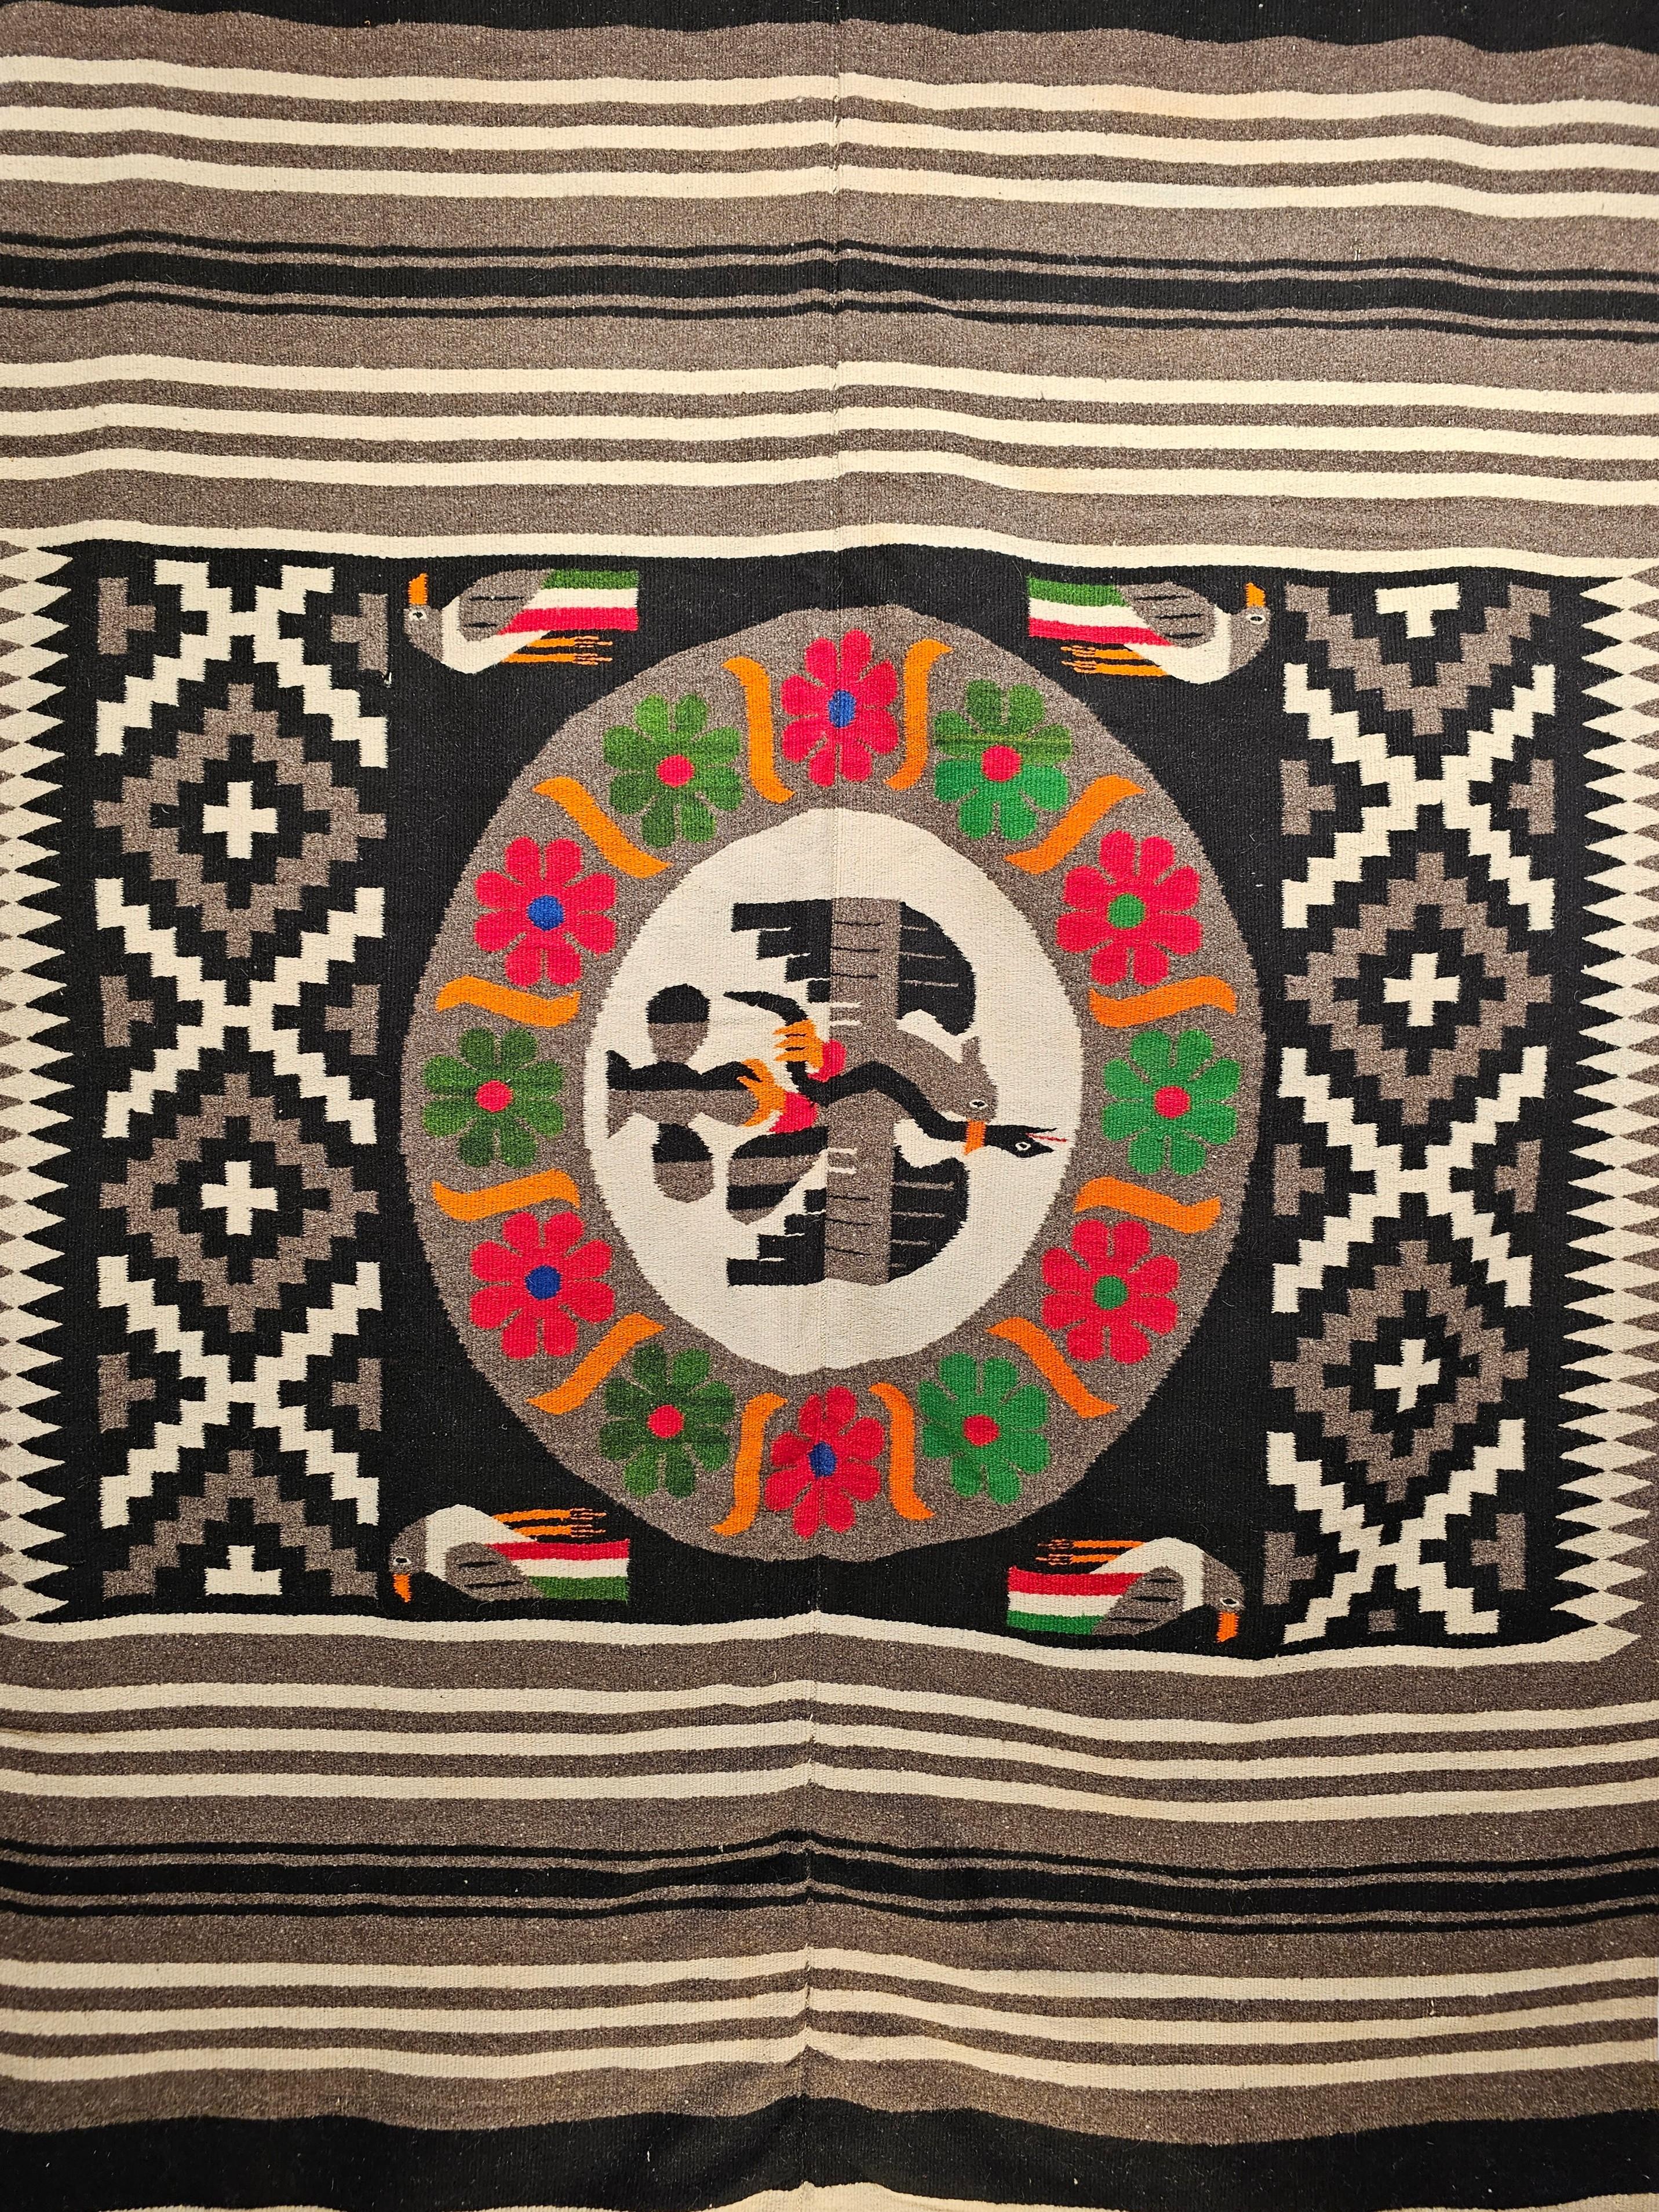 Vintage Mexican Serape Kilim Rug in Gray, Black and Ivory Colors. A beautiful Serape kilim rug was woven in Mexico in the 4th quarter of the 1900s and has a unique and colorful Mexican Flag design in the center. The kilim is made of two individual